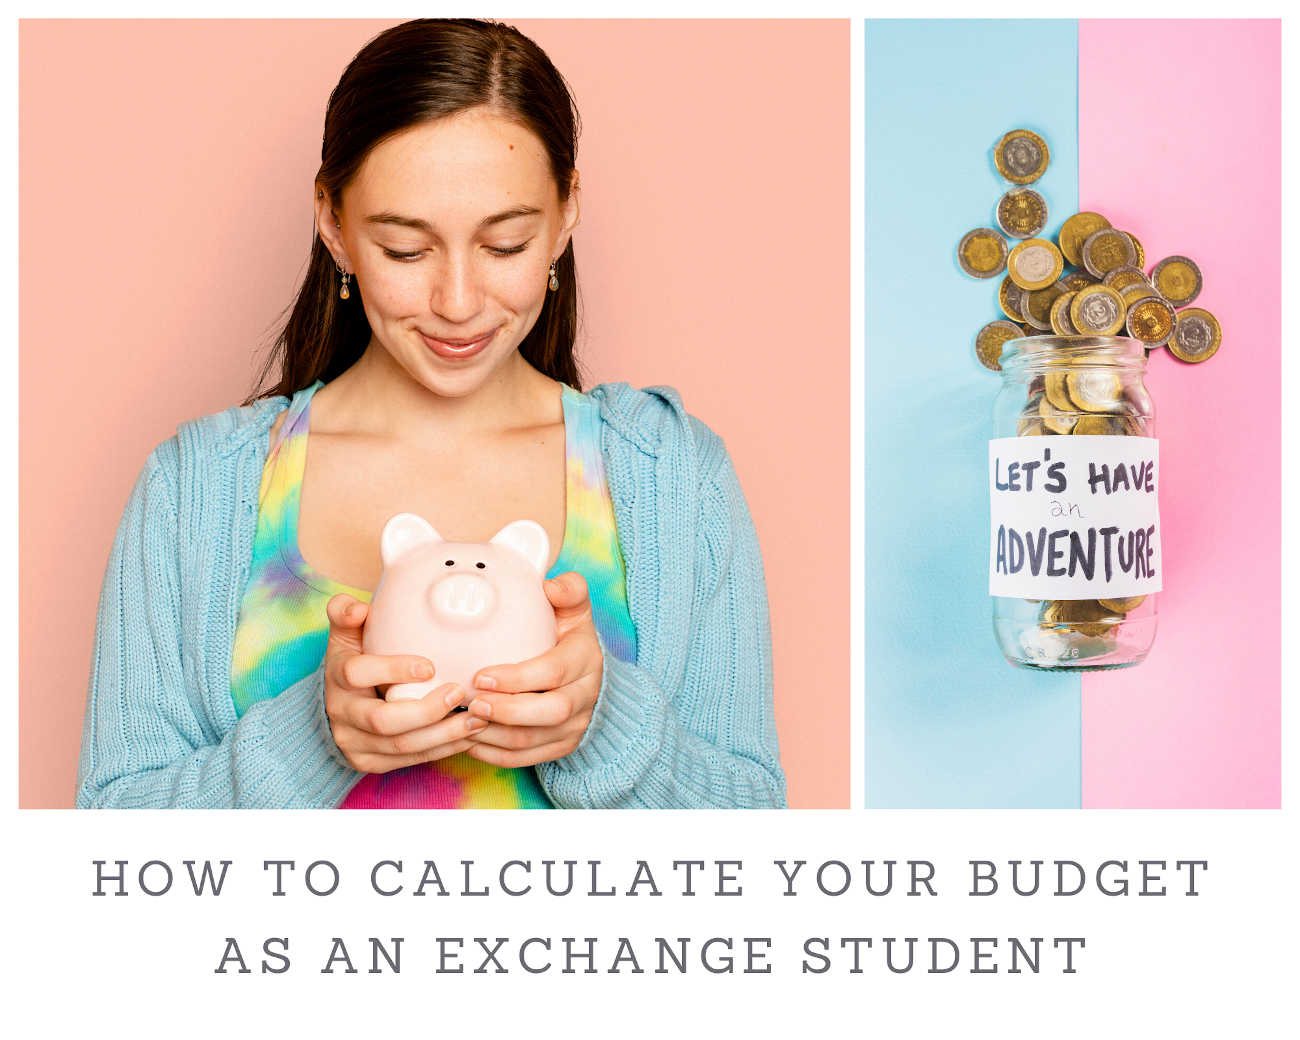 How to calculate your budget as an exchange student